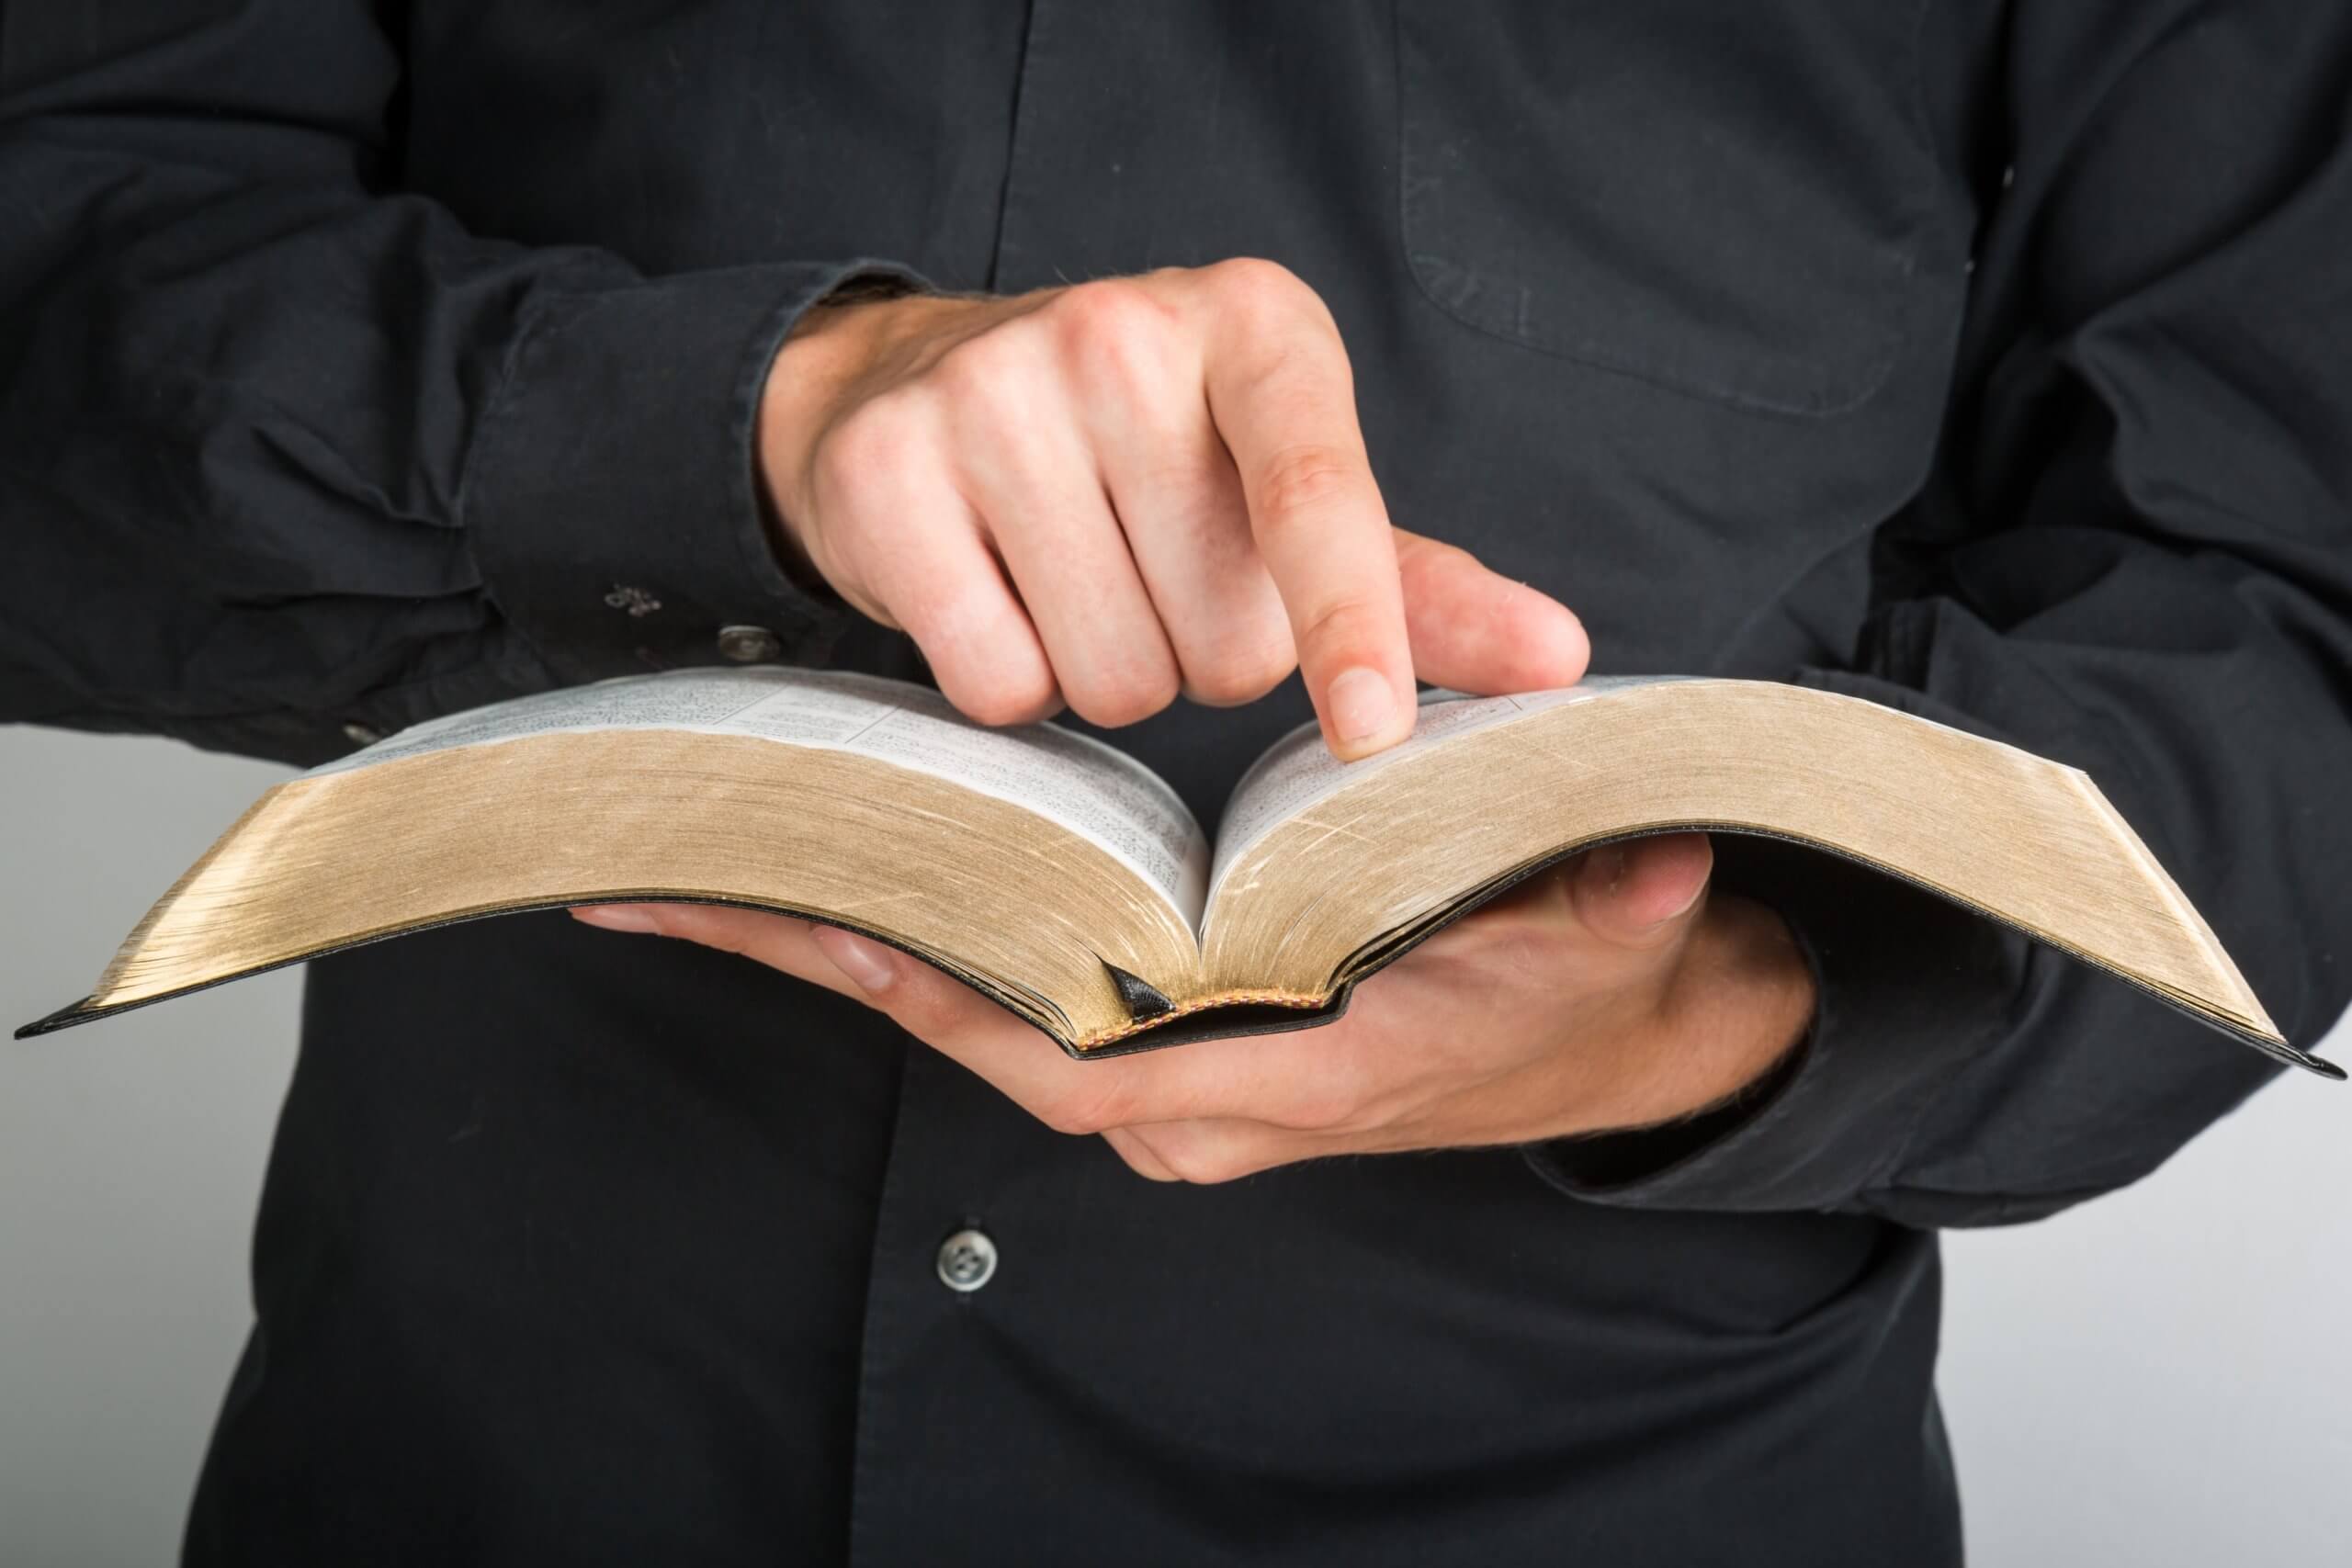 Stock photo: A pastor in a black shirt points to a passage in an open Bible. © BillionPhotos.com /stock.adobe.com